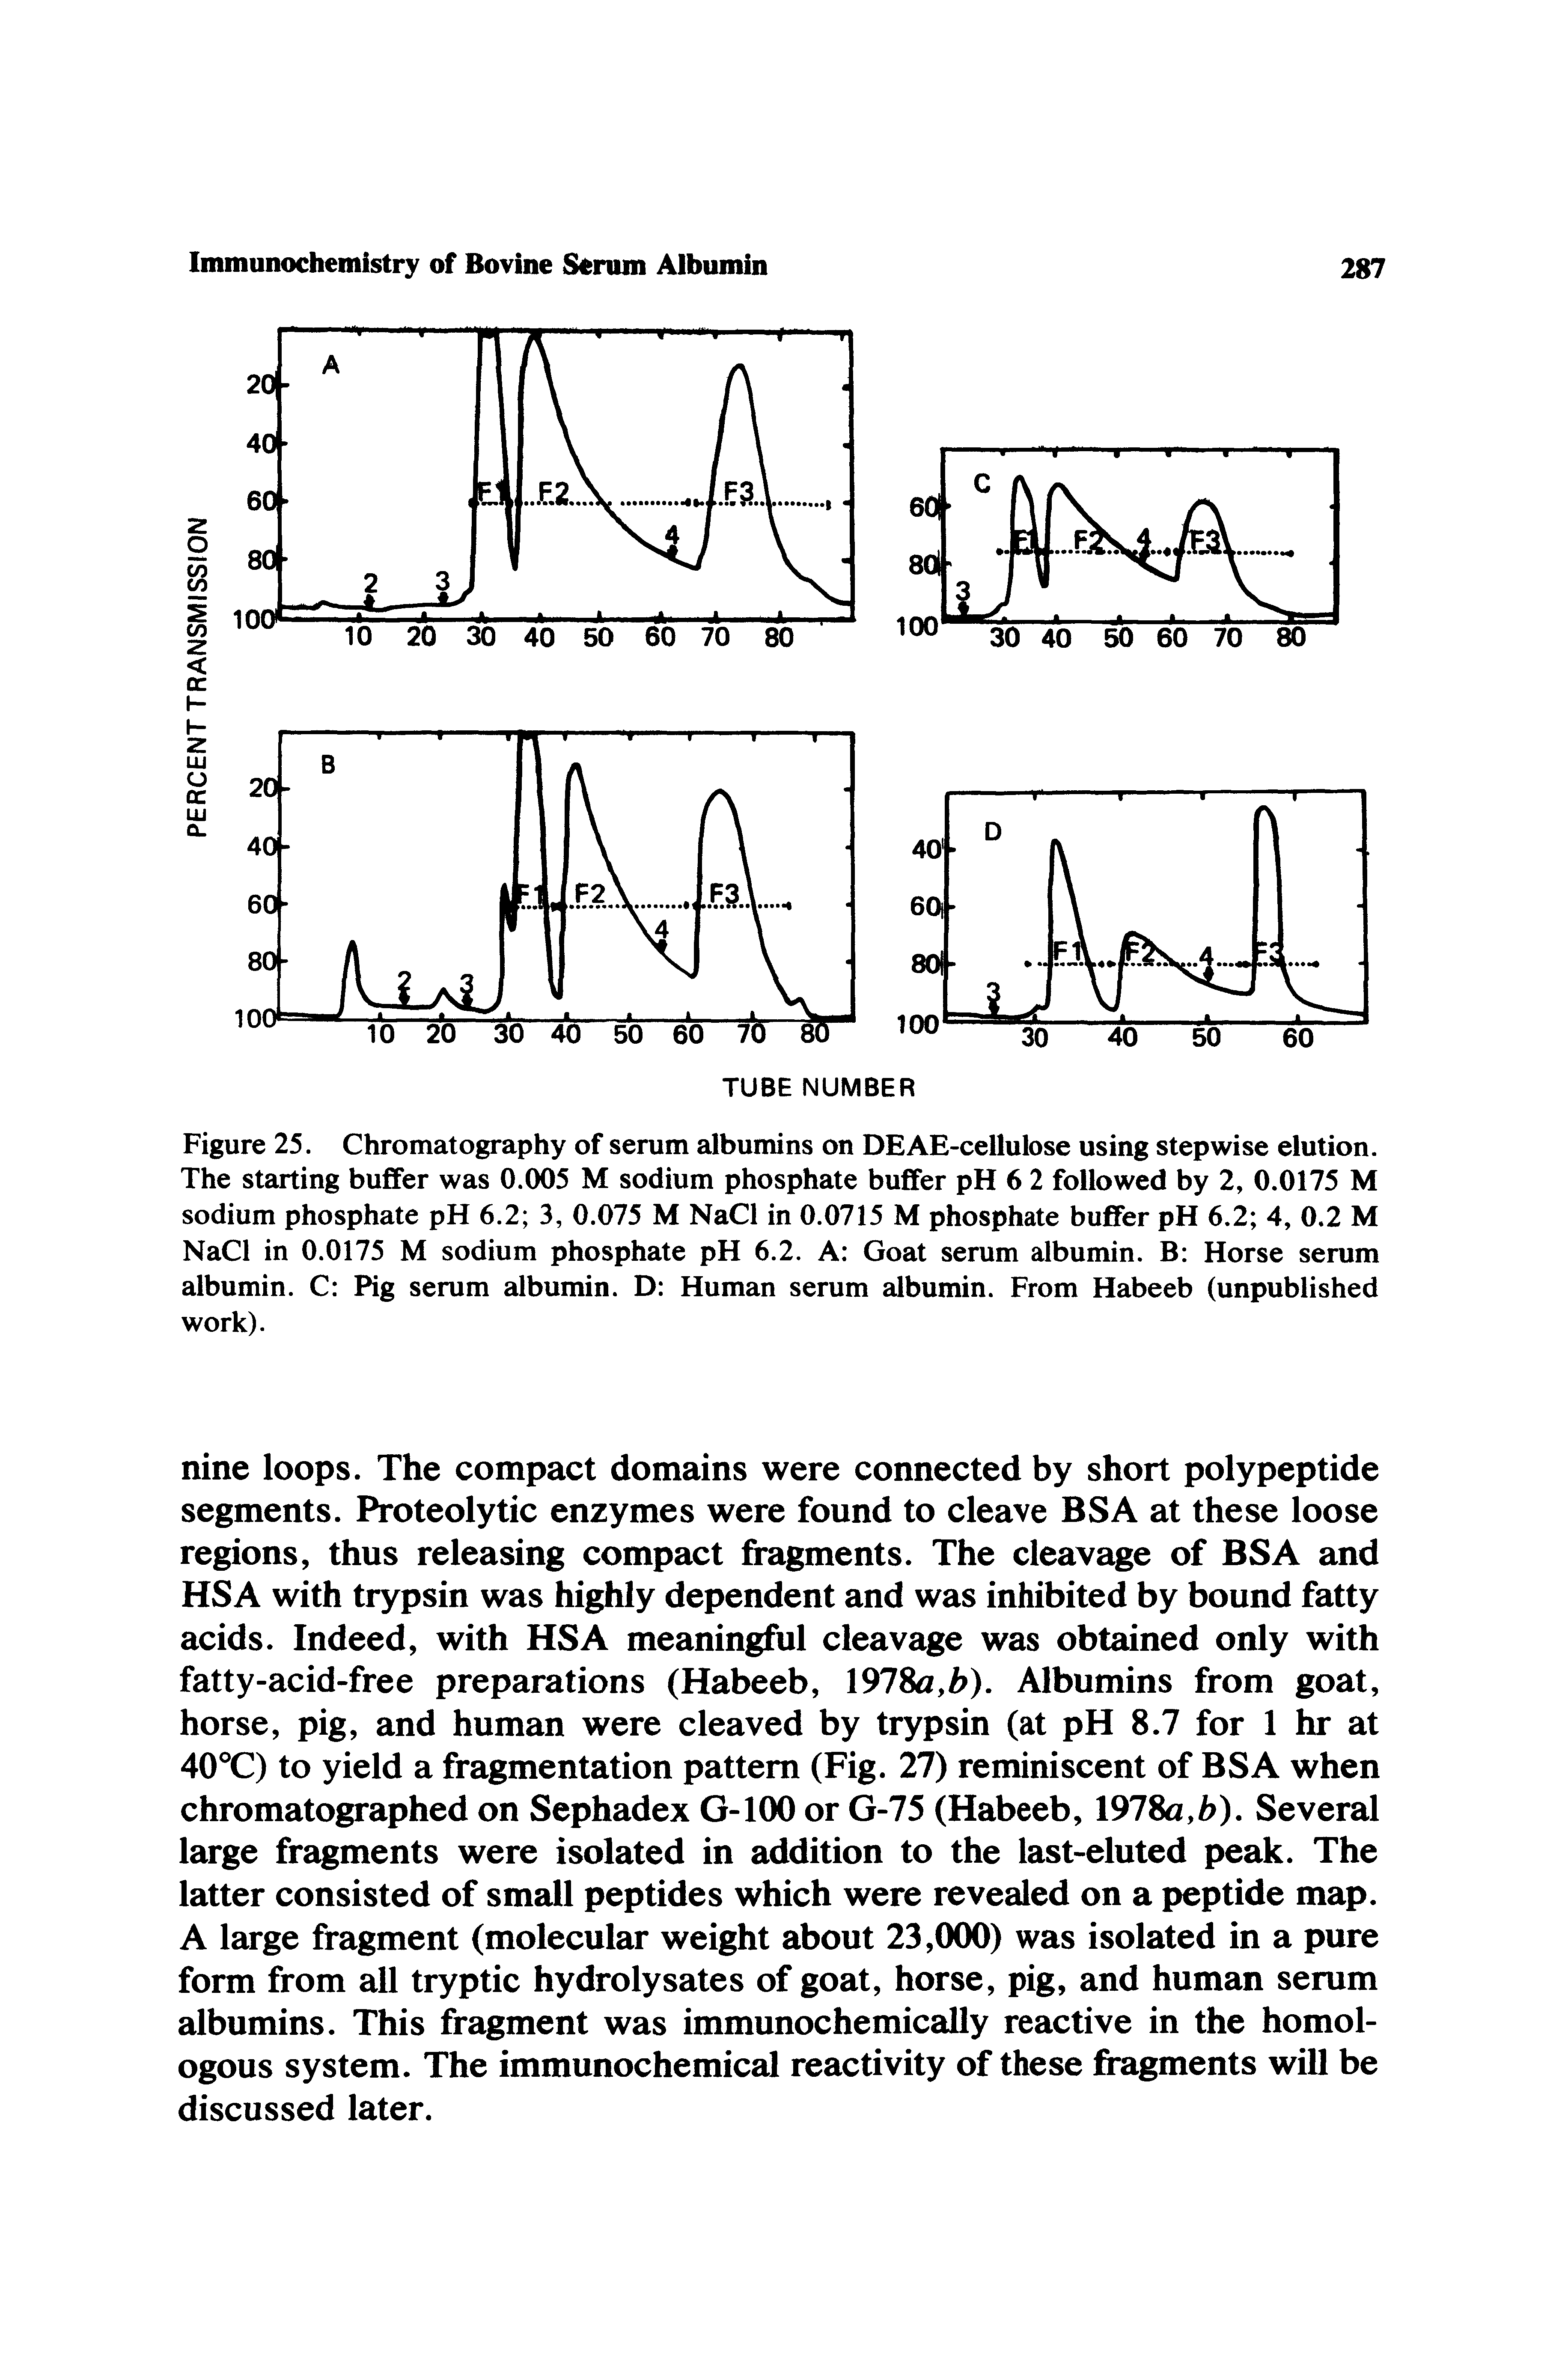 Figure 25. Chromatography of serum albumins on DEAE-cellulose using stepwise elution. The starting buffer was 0.005 M sodium phosphate buffer pH 6 2 followed by 2, 0.0175 M sodium phosphate pH 6.2 3, 0.075 M NaCl in 0.0715 M phosphate bufier pH 6.2 4, 0.2 M NaCl in 0.0175 M sodium phosphate pH 6.2. A Goat serum albumin. B Horse serum albumin. C Pig serum albumin. D Human serum albumin. From Habeeb (unpublished work).